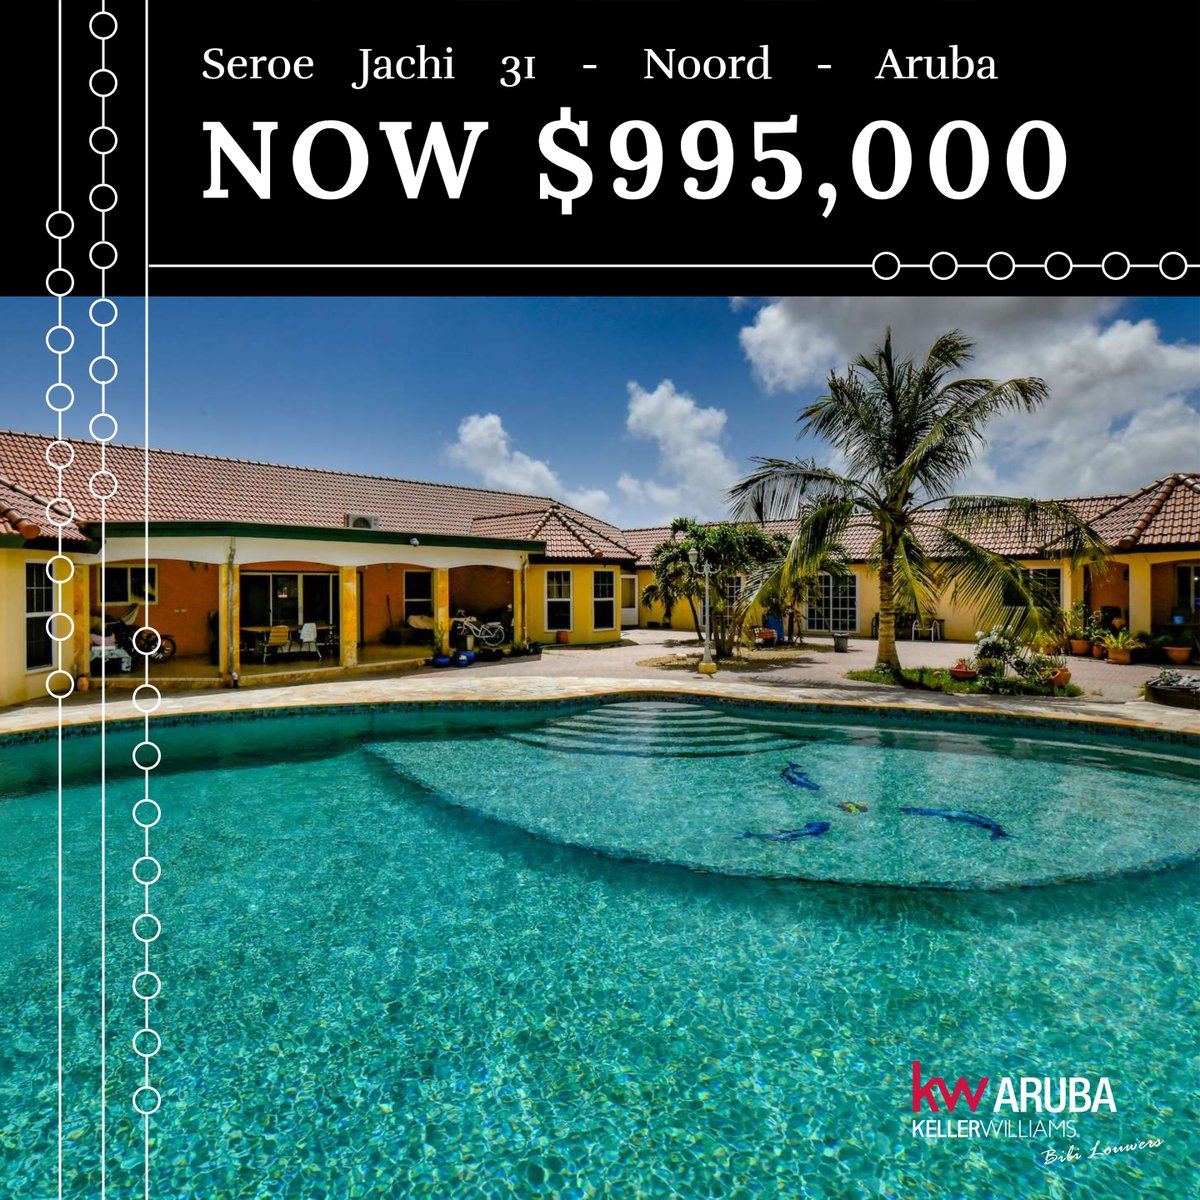 Reduced! Stunning villa on a large property land with a spacious pool. 🏡💦 #dreamhome #reducedprice
.
kw-aruba.com/listings/seroe…